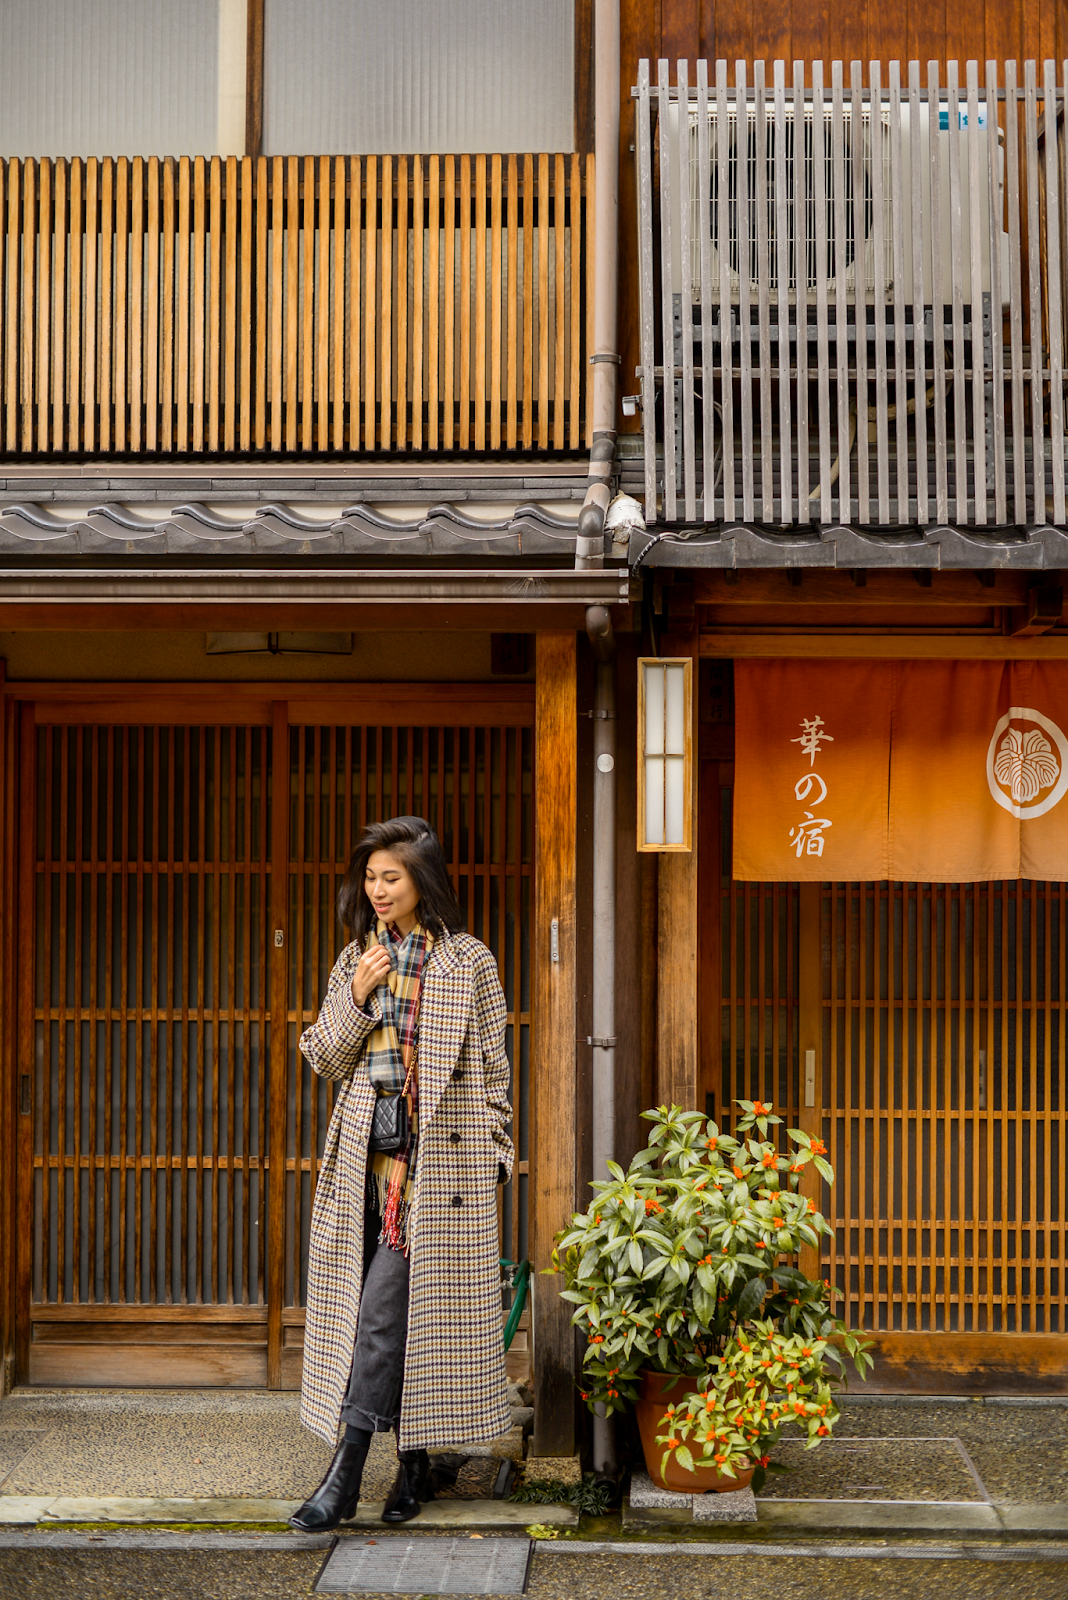 Winter outfit ideas of Japan, Japan's gold town Kanazawa, Kanazawa trip from Tokyo, must-visit cities in Japan, Nishi Chaya District, Higashi Chaya District, photogenic and charming towns in Japan - FOREVERVANNY